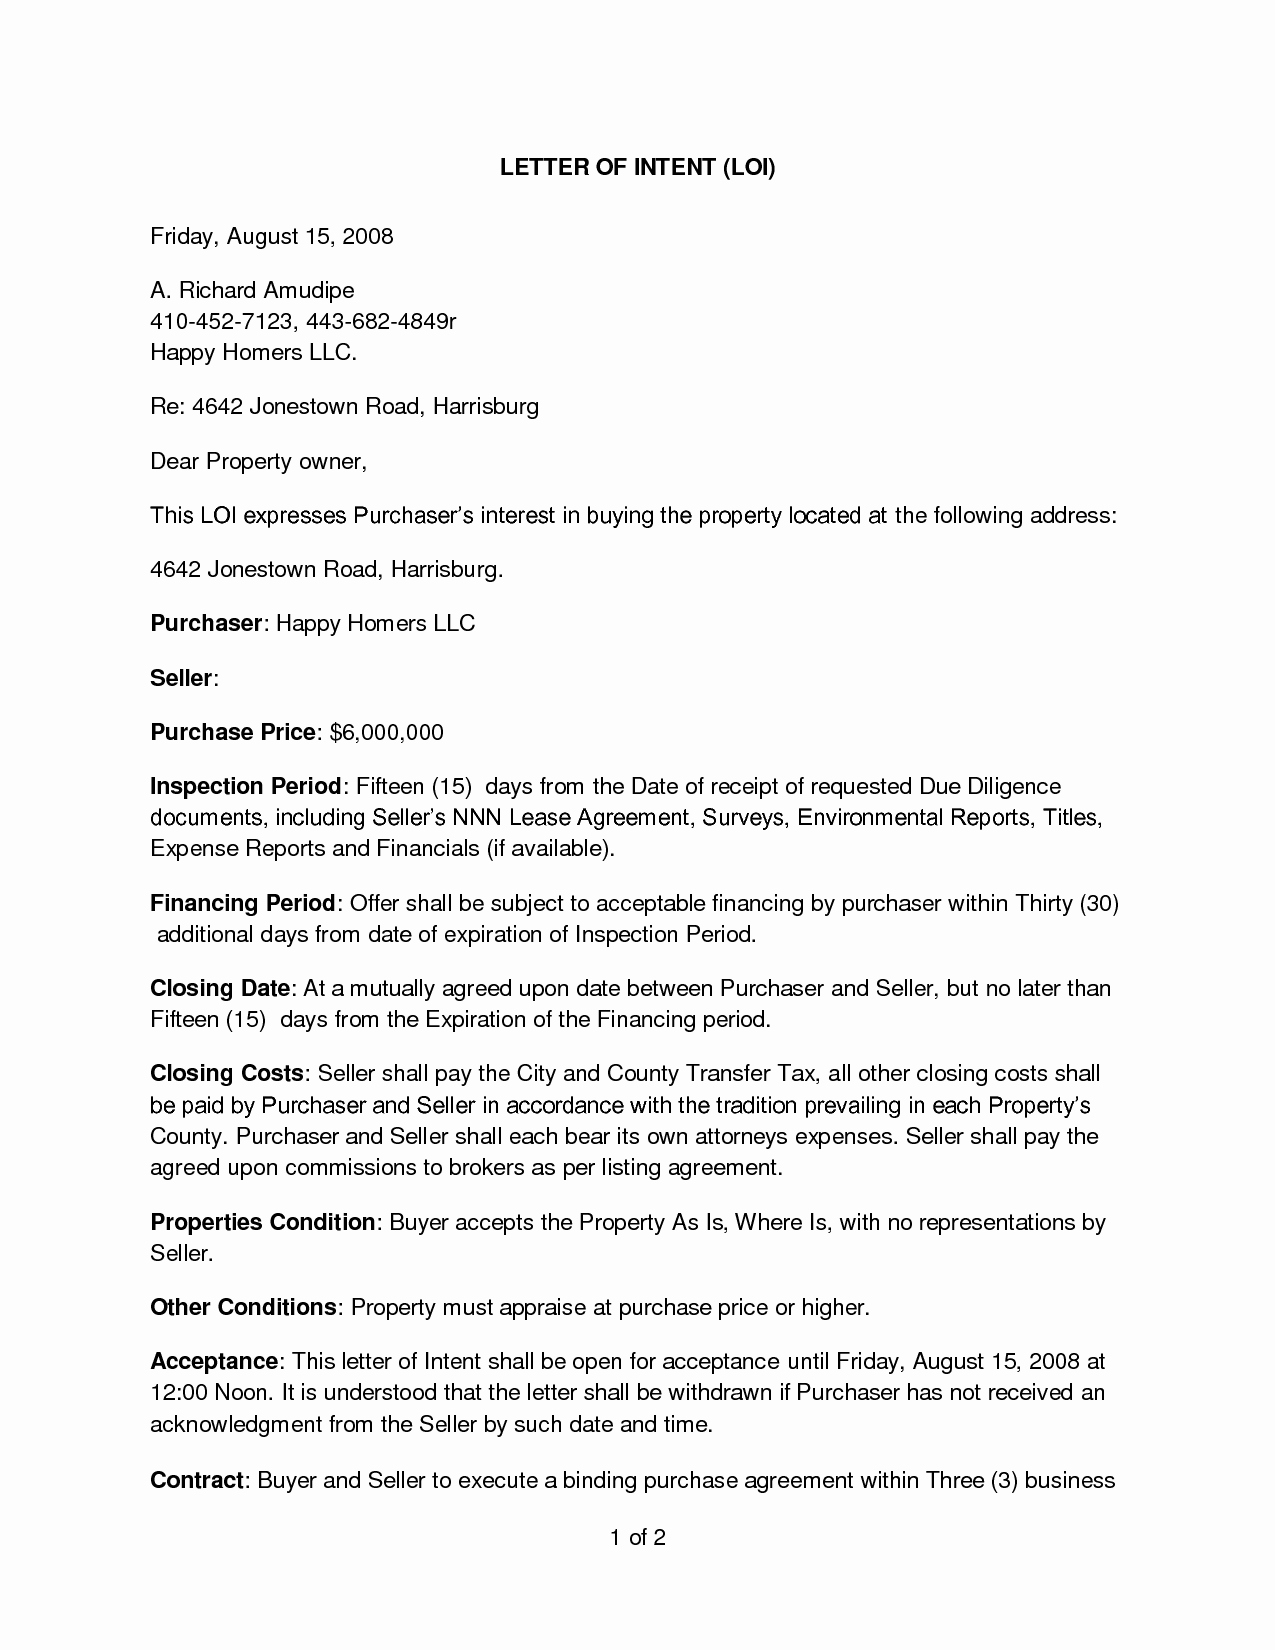 Letter Of Intent to Purchase Real Estate Unique Sample Letter Intent to Purchase Real Estate Free